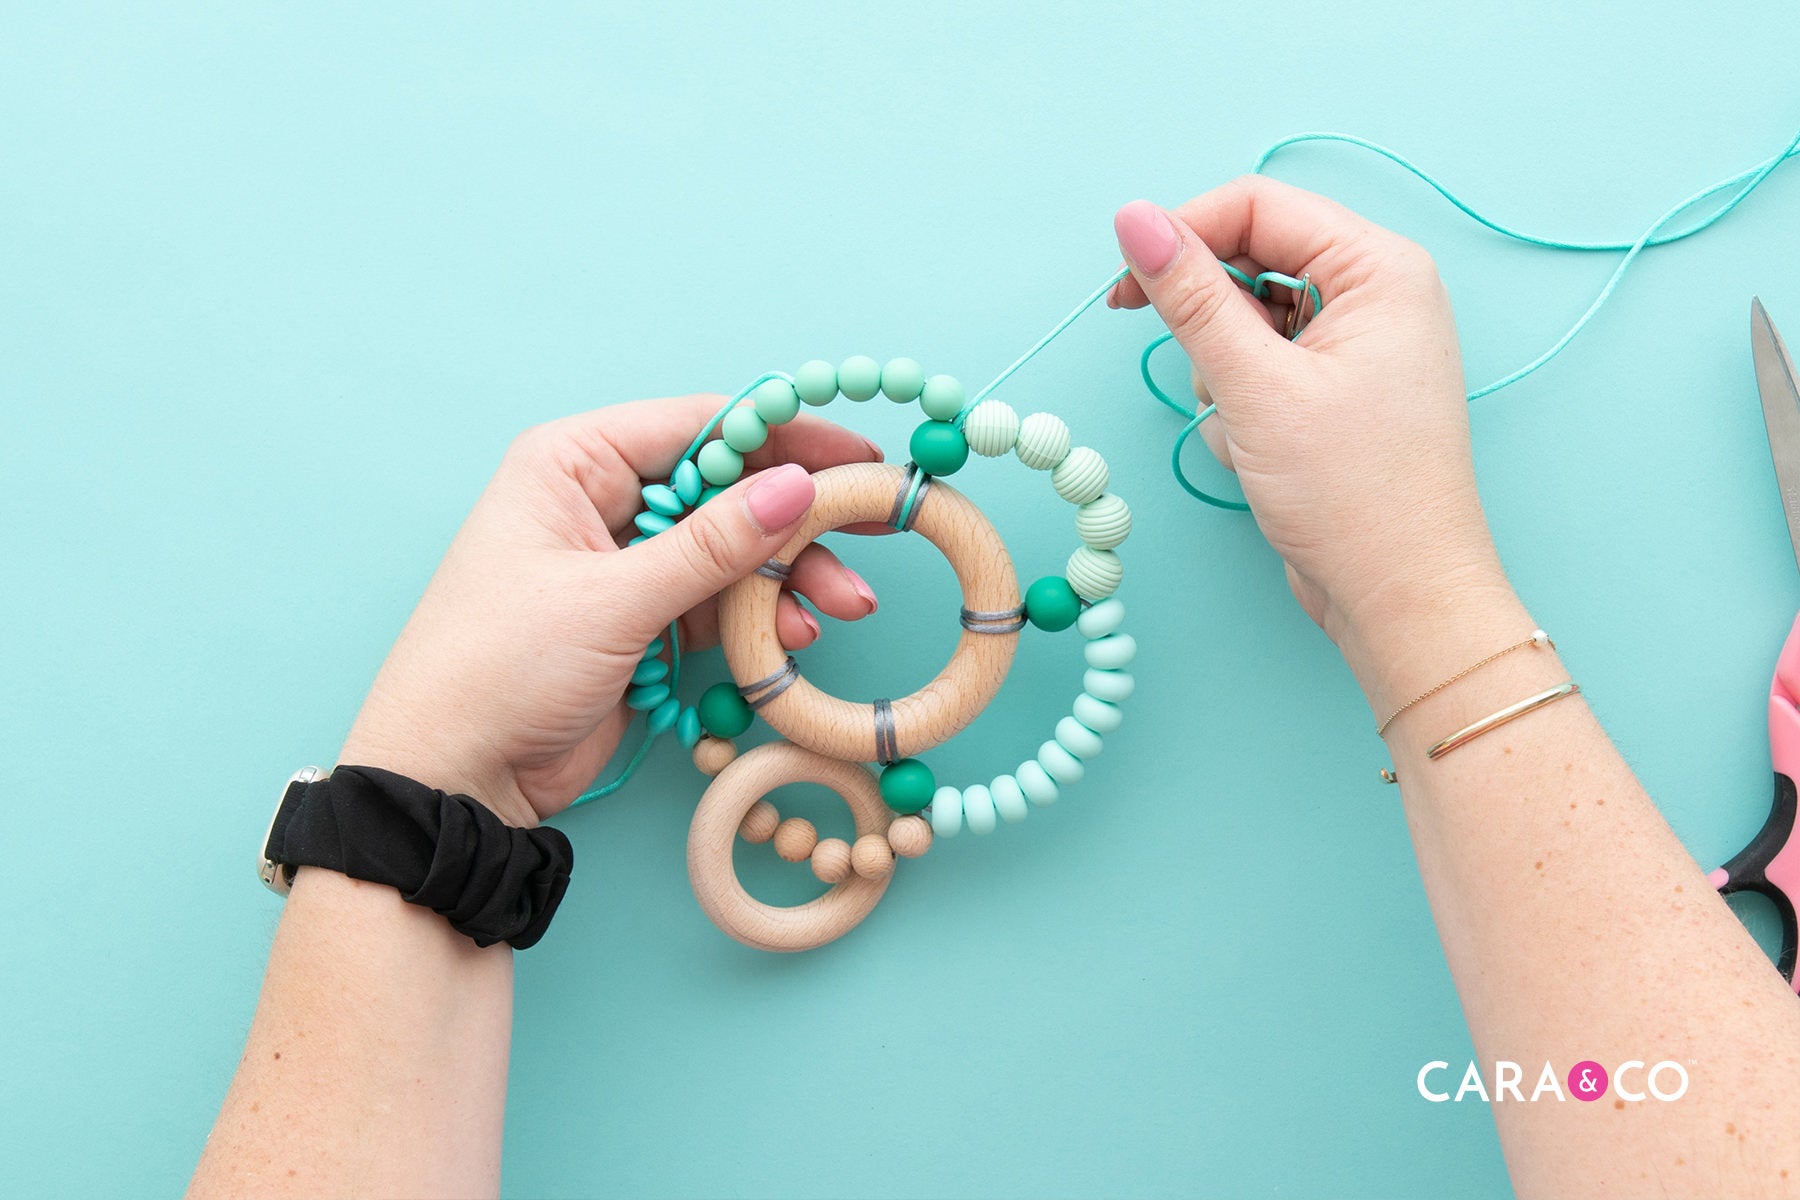 Silicone Teether Toy - Cara & Co